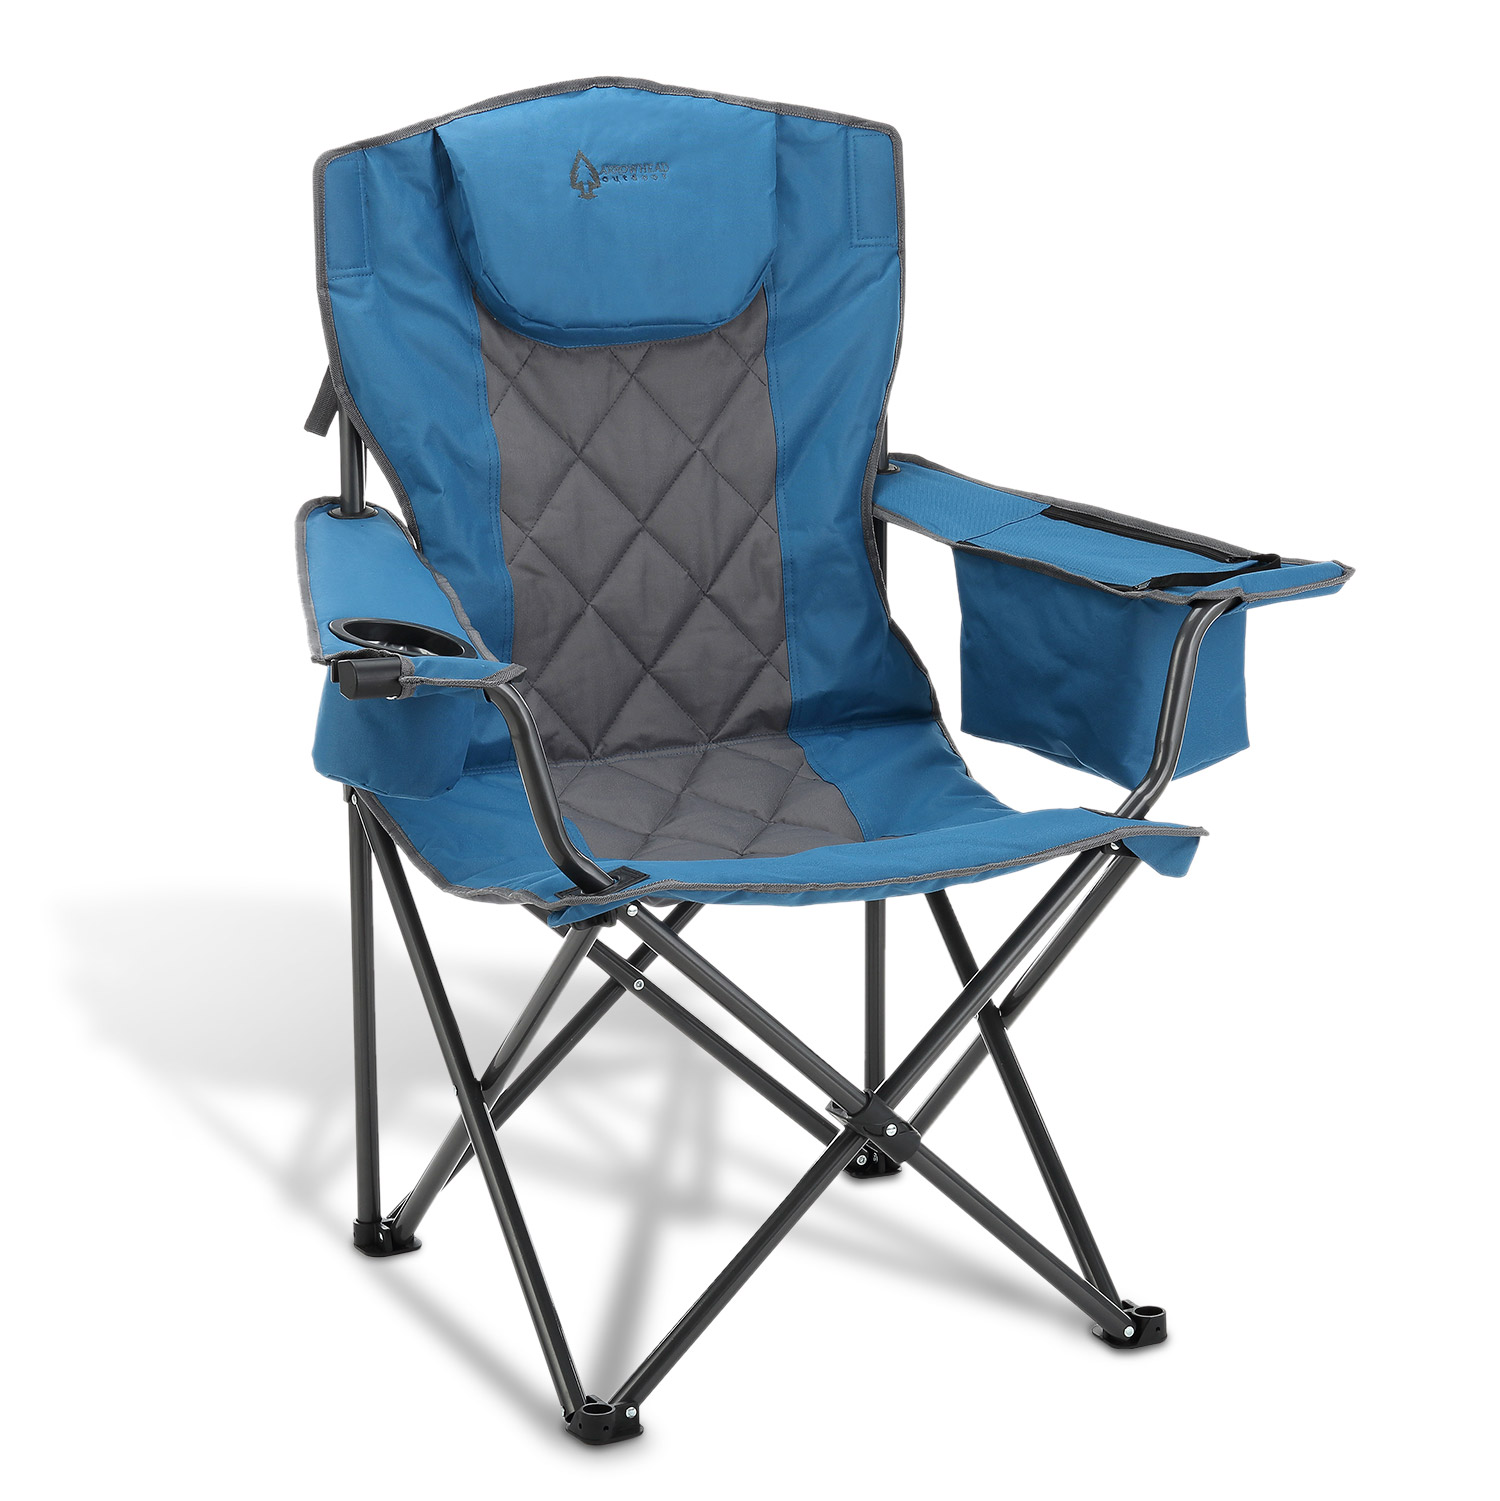 ARROWHEAD OUTDOOR Portable Folding Camping Quad Chair w/ 6-Can Cooler, Cup & Wine Glass Holders, Heavy-Duty Carrying Bag, Padded Armrests, Headrest, Supports up to 450lbs, USA-Based Support (Blue) - image 1 of 6